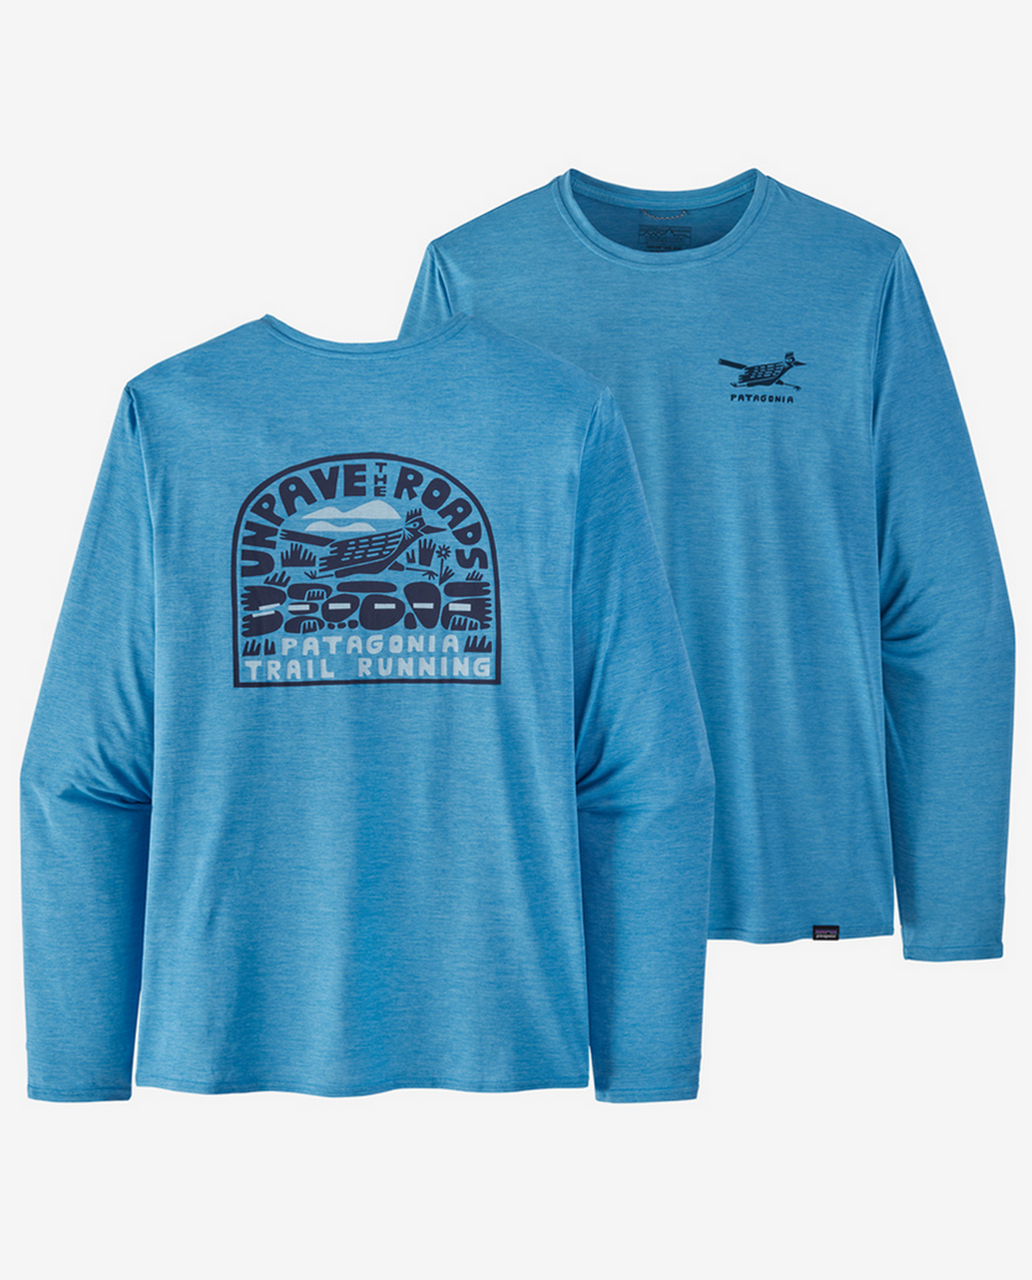 https://cdn11.bigcommerce.com/s-kkqtn7nqjc/images/stencil/1280x1280/products/14262/51924/97cd9c00PATAGONIA-Long-Sleeved-Capilene-Cool-Daily-Graphic-Shirt-45190_URAX__52261.1649895454.png?c=1